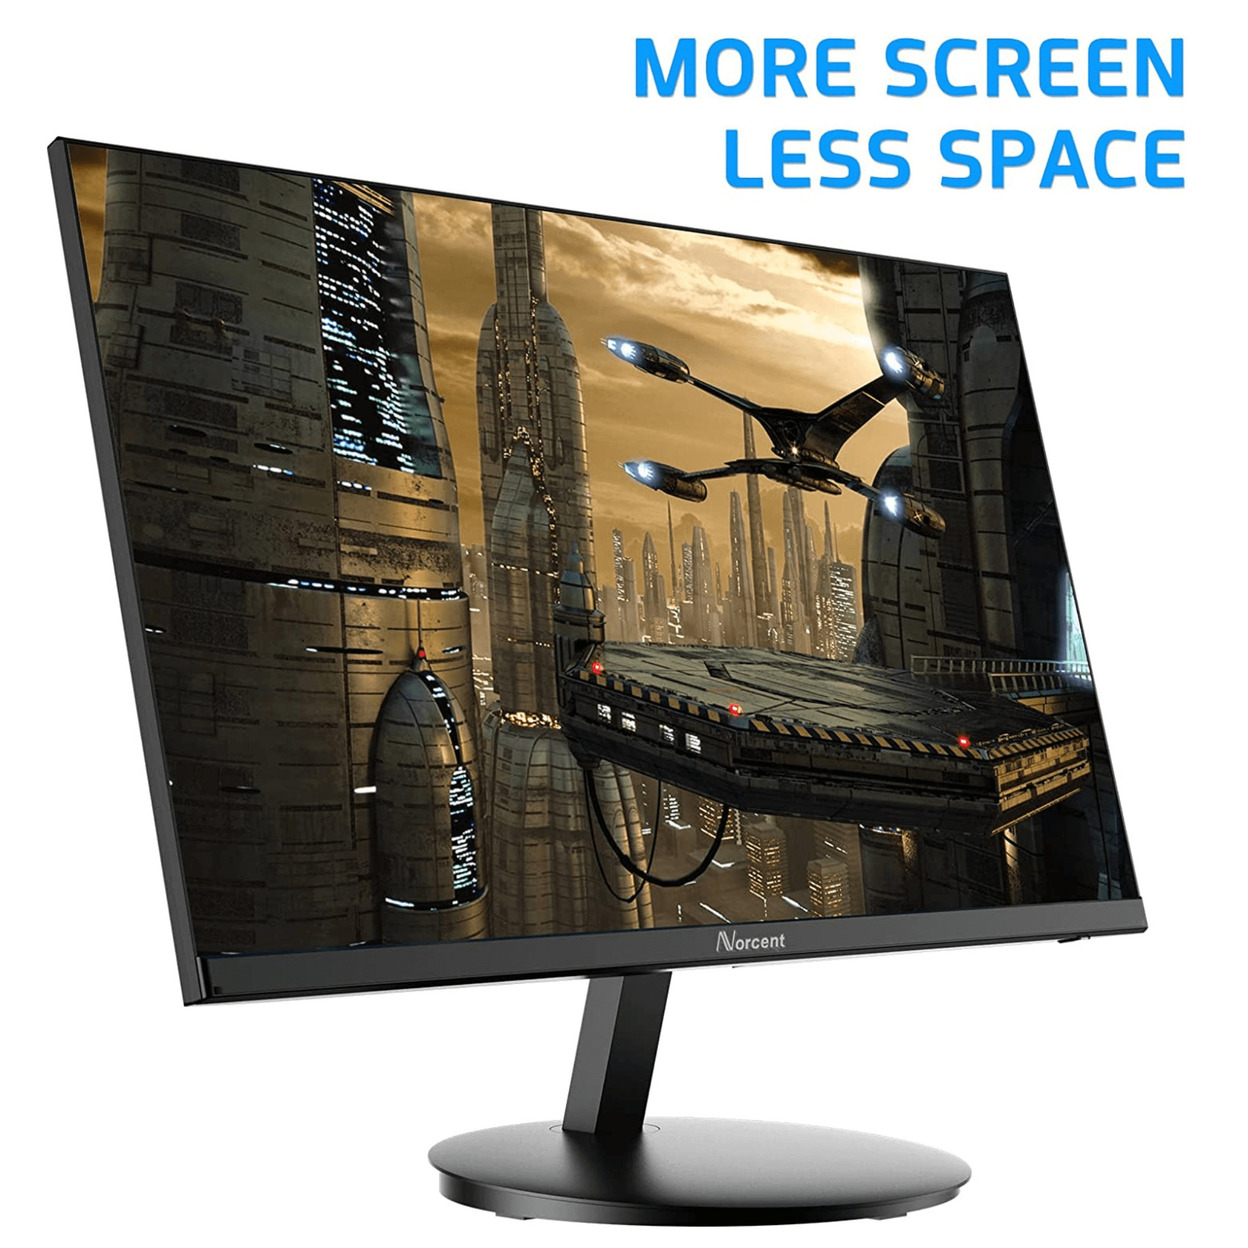 Norcent 24 Inch Frameless Computer Monitor FHD 75HZ VA With Built-In Speakers